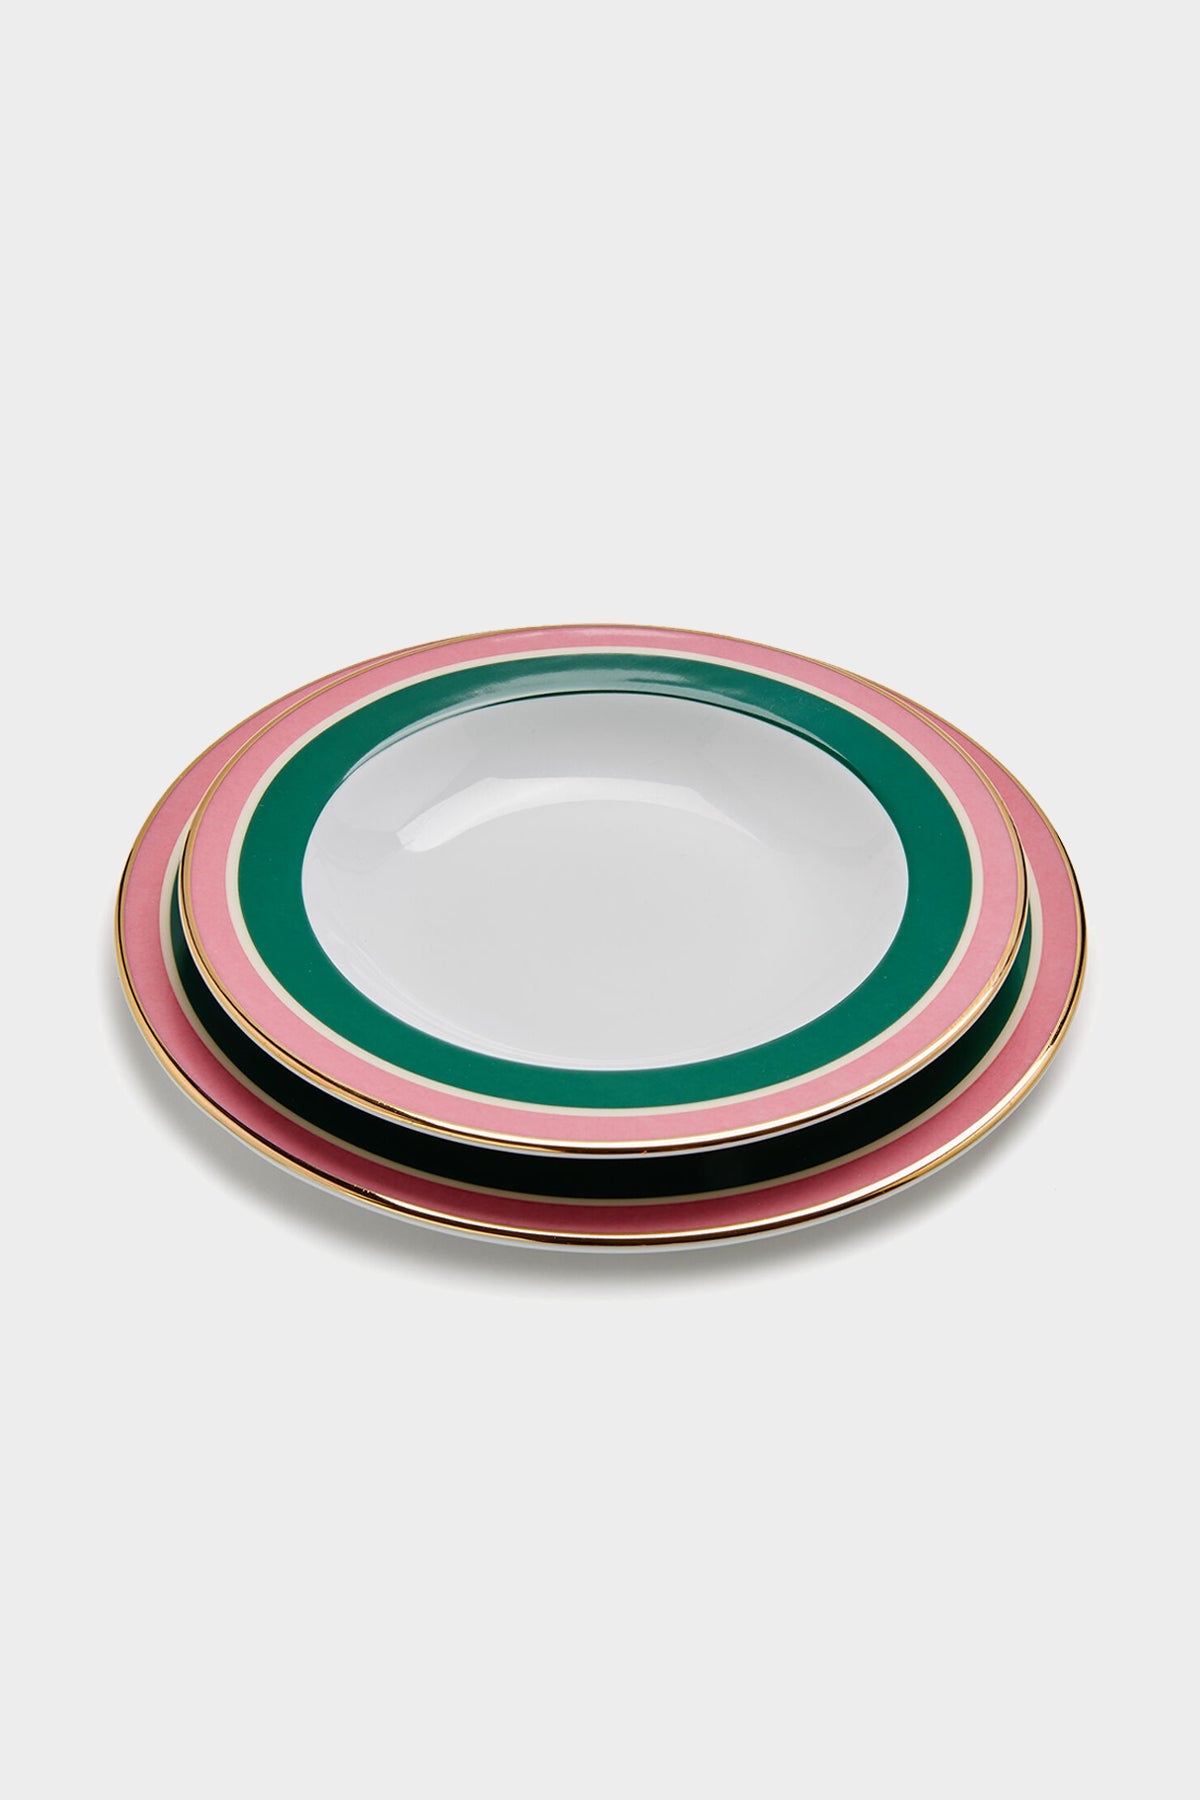 Soup and Dinner Plate Set of 2 in Rainbow Verde - shop-olivia.com